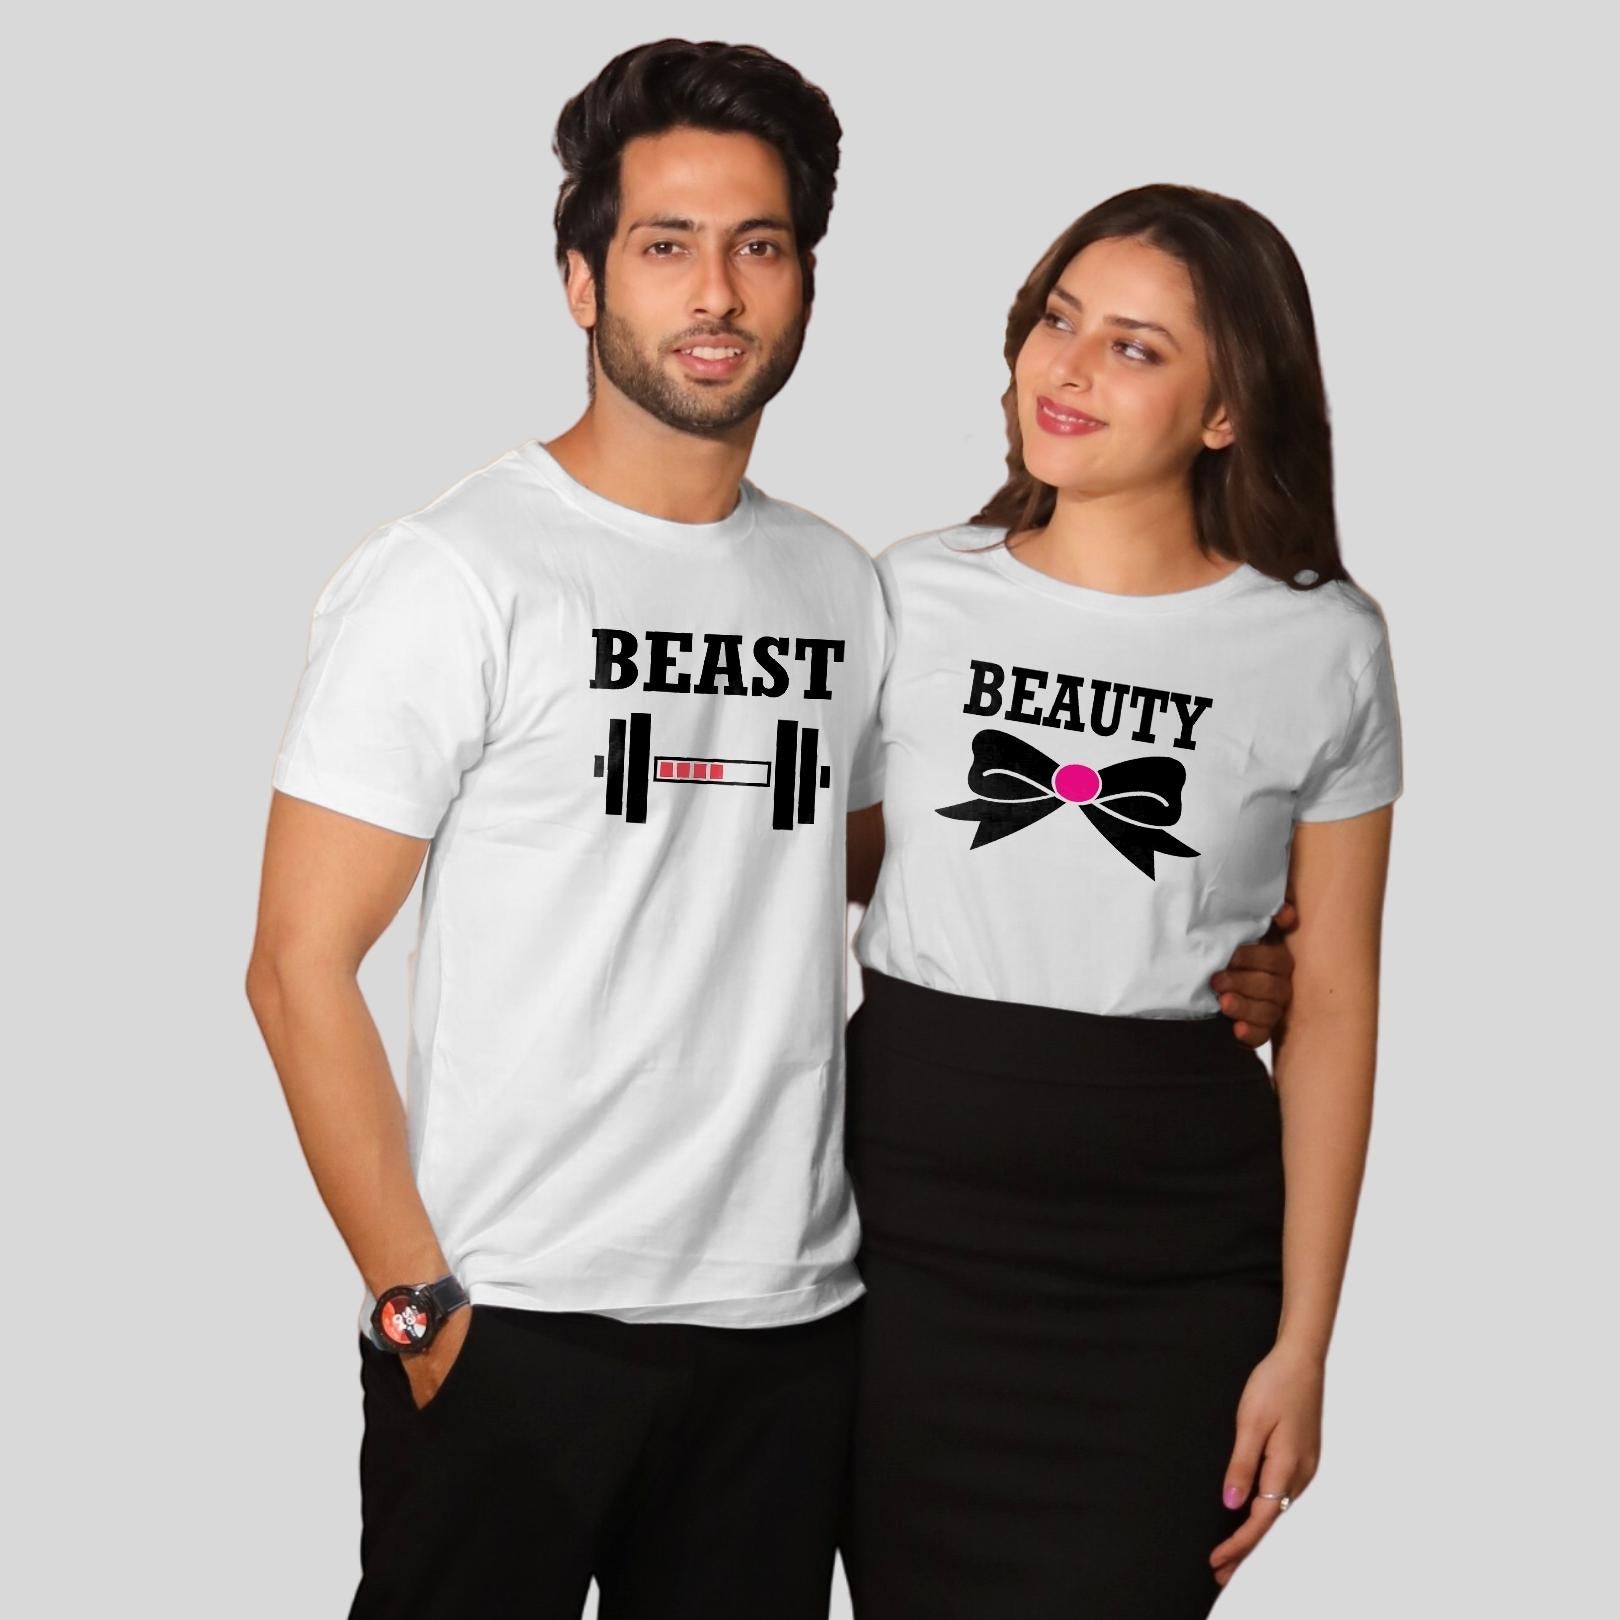 Couple T Shirt In White Colour - Beauty Beast Variant